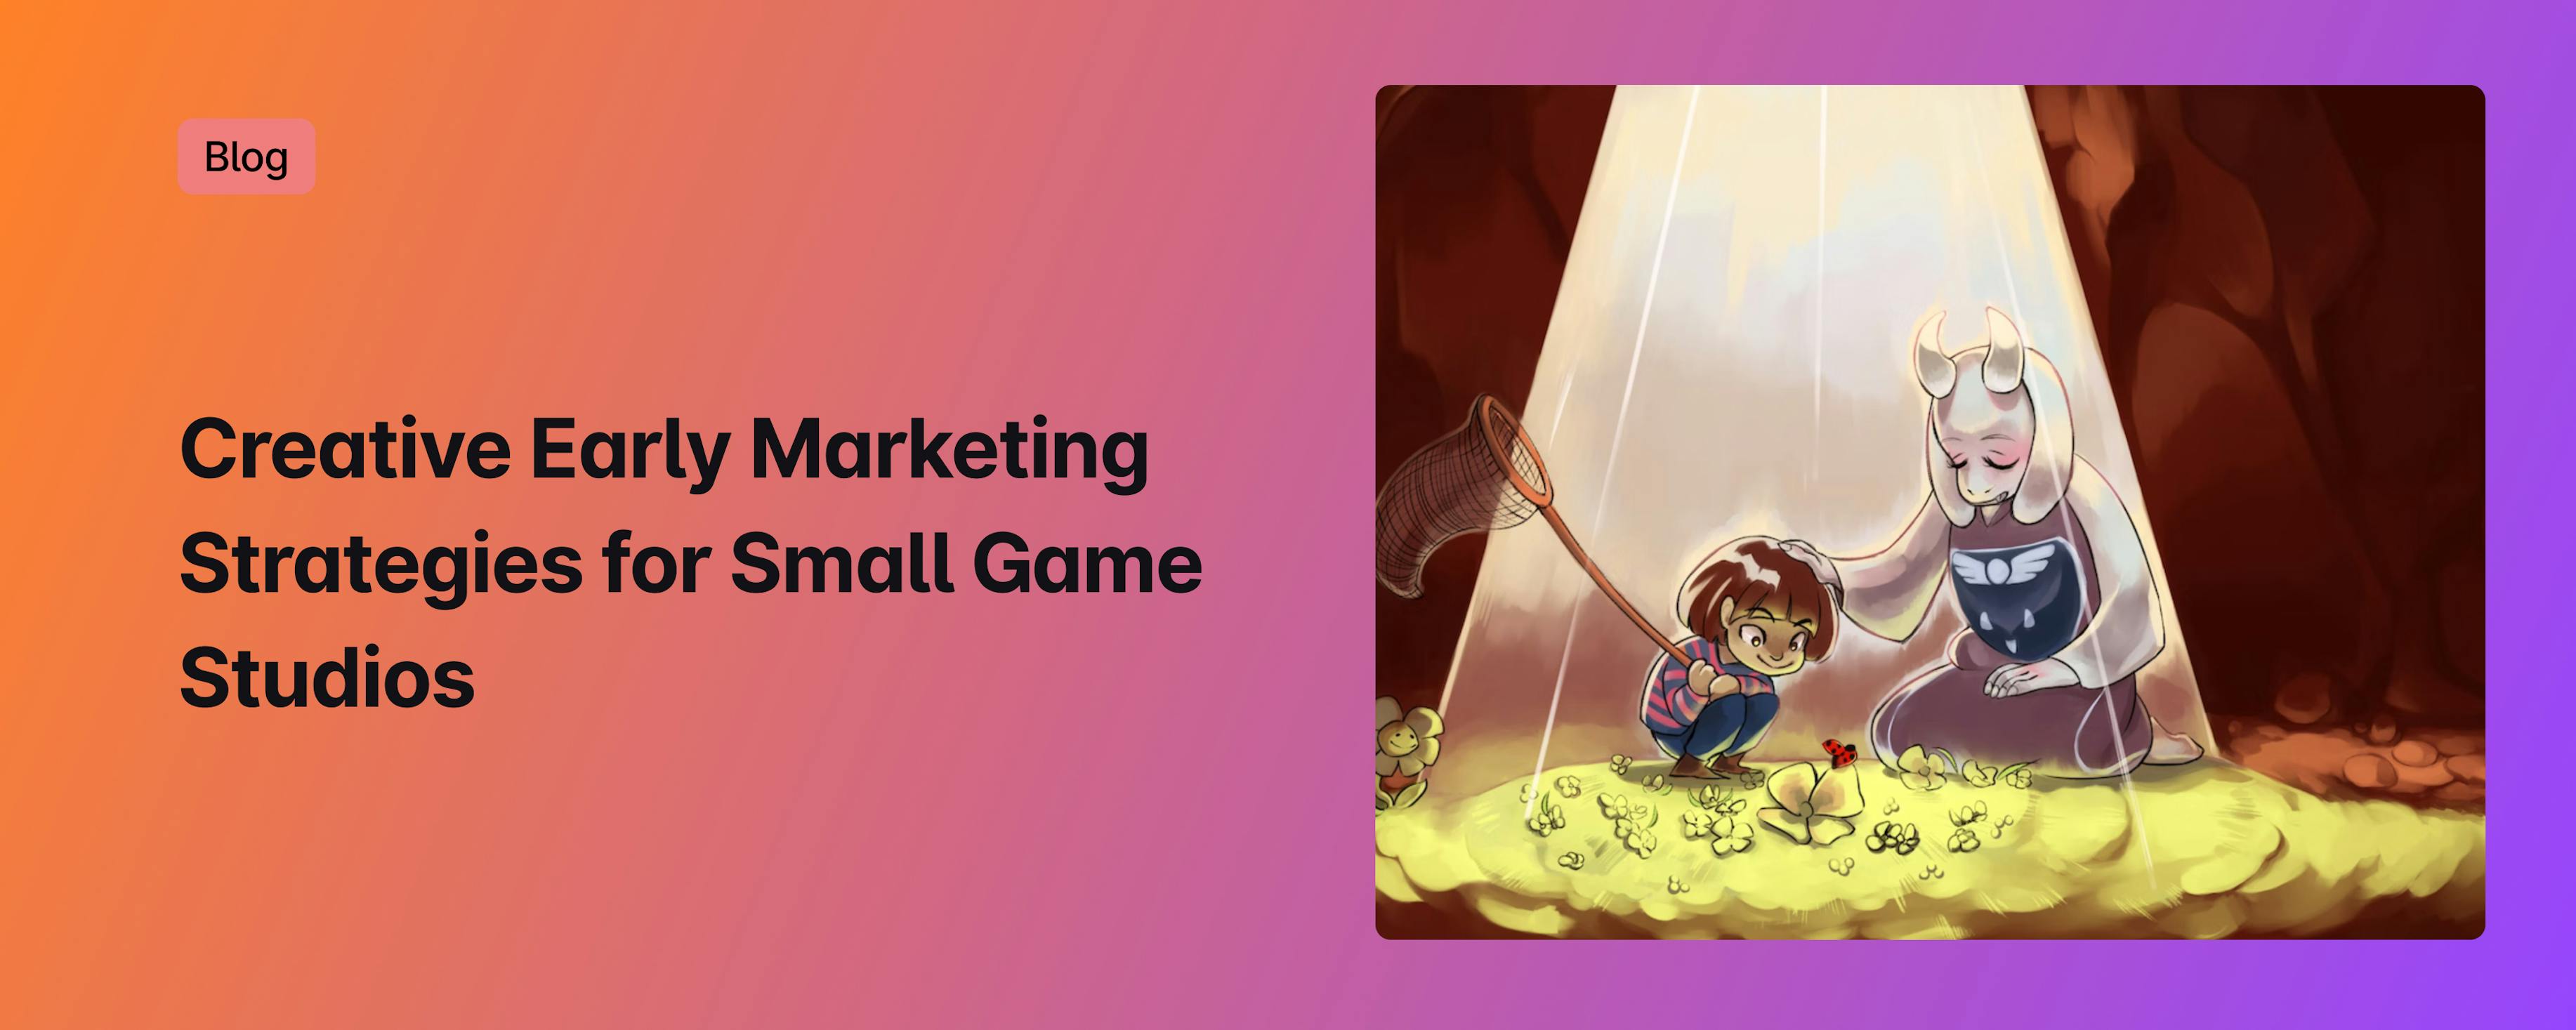 Creative Early Marketing Strategies for Small Game Studios